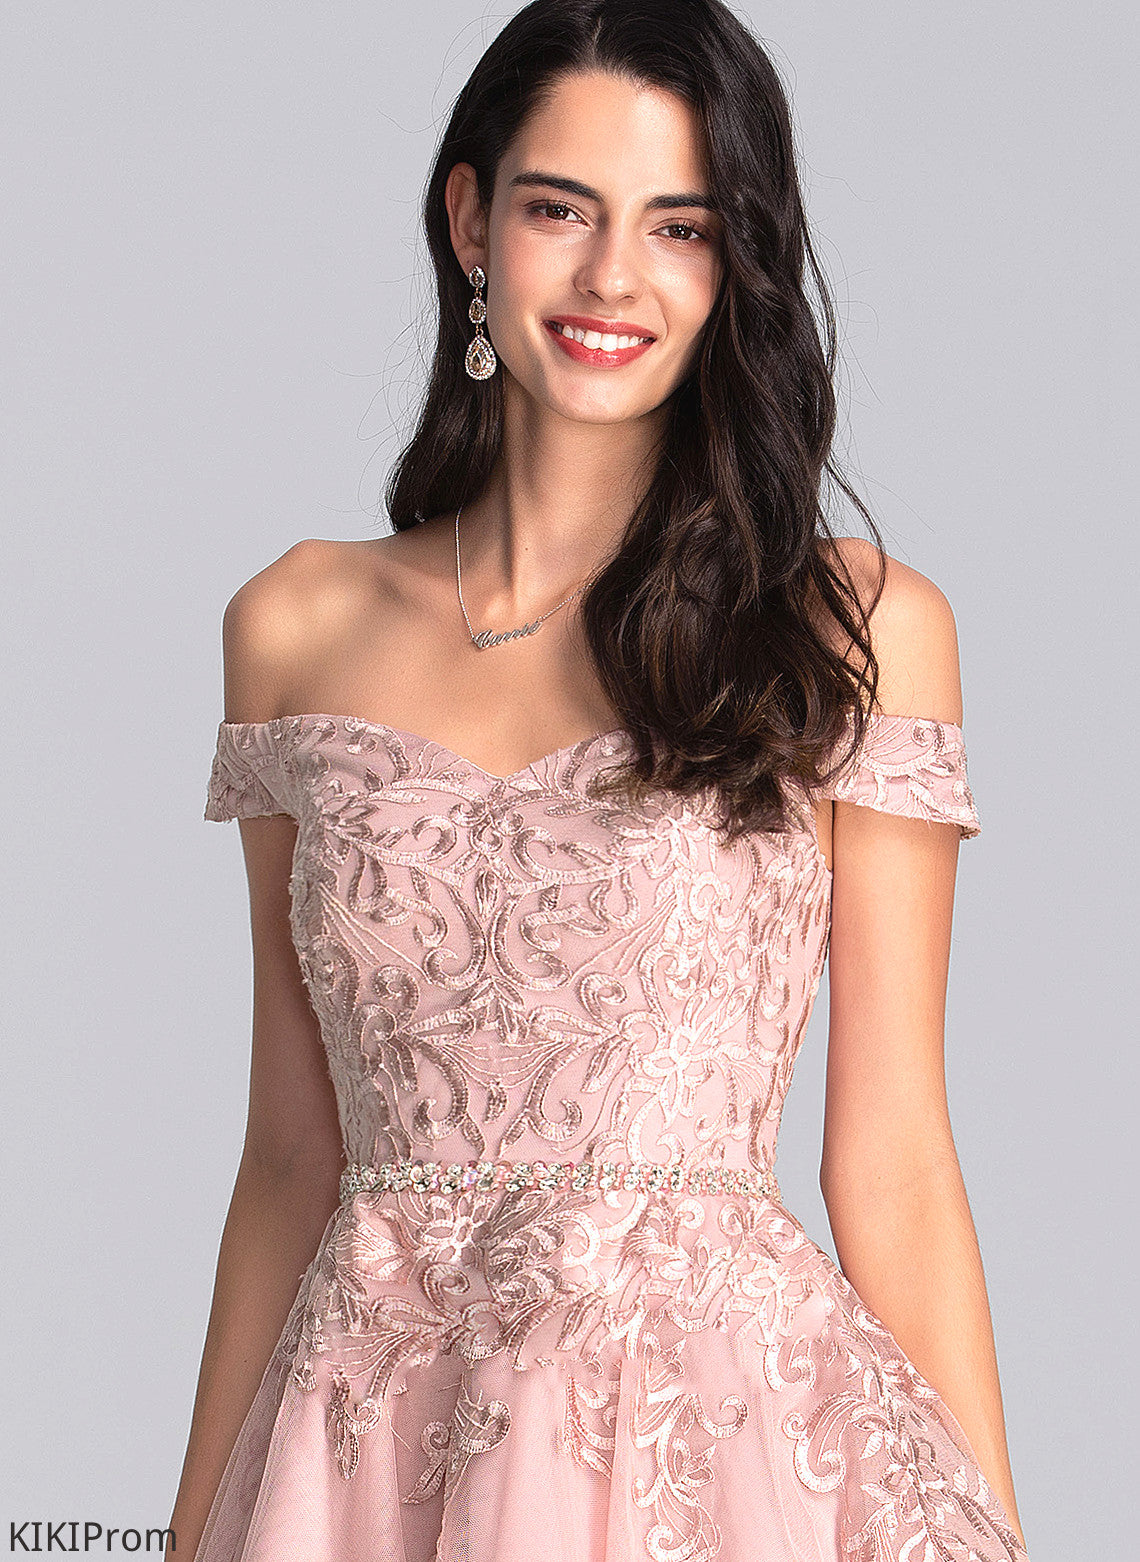 Dress Off-the-Shoulder A-Line With Meg Lace Beading Short/Mini Tulle Homecoming Homecoming Dresses